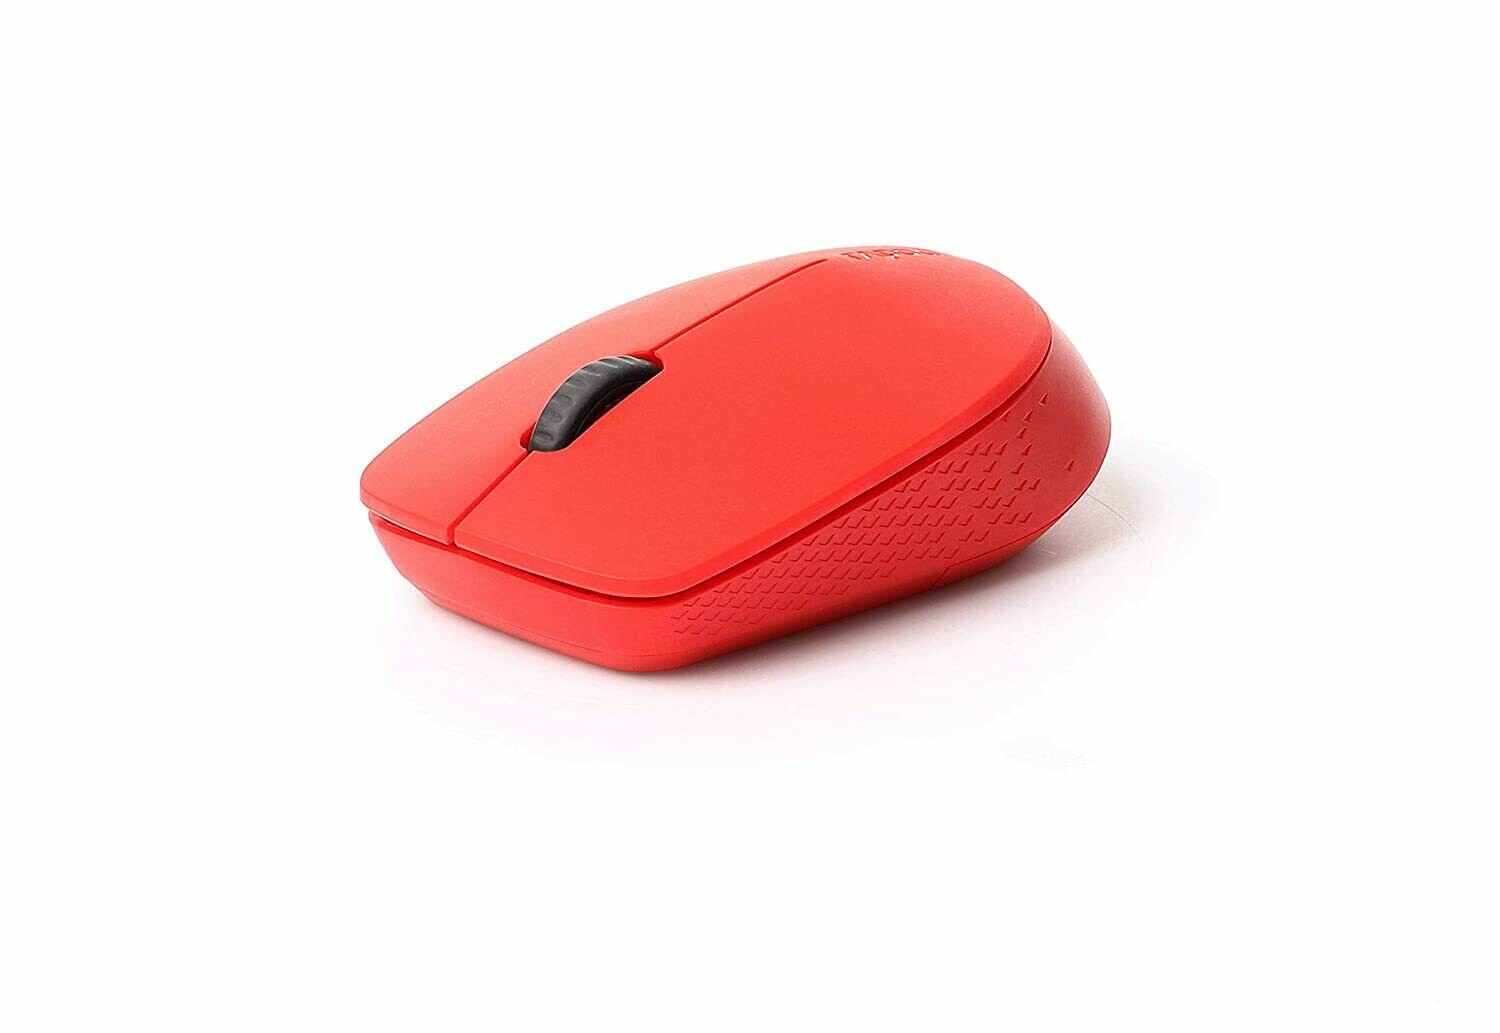 Rapoo M100 Silent Wireless Mouse With Bluetooth, Red - Rs.640